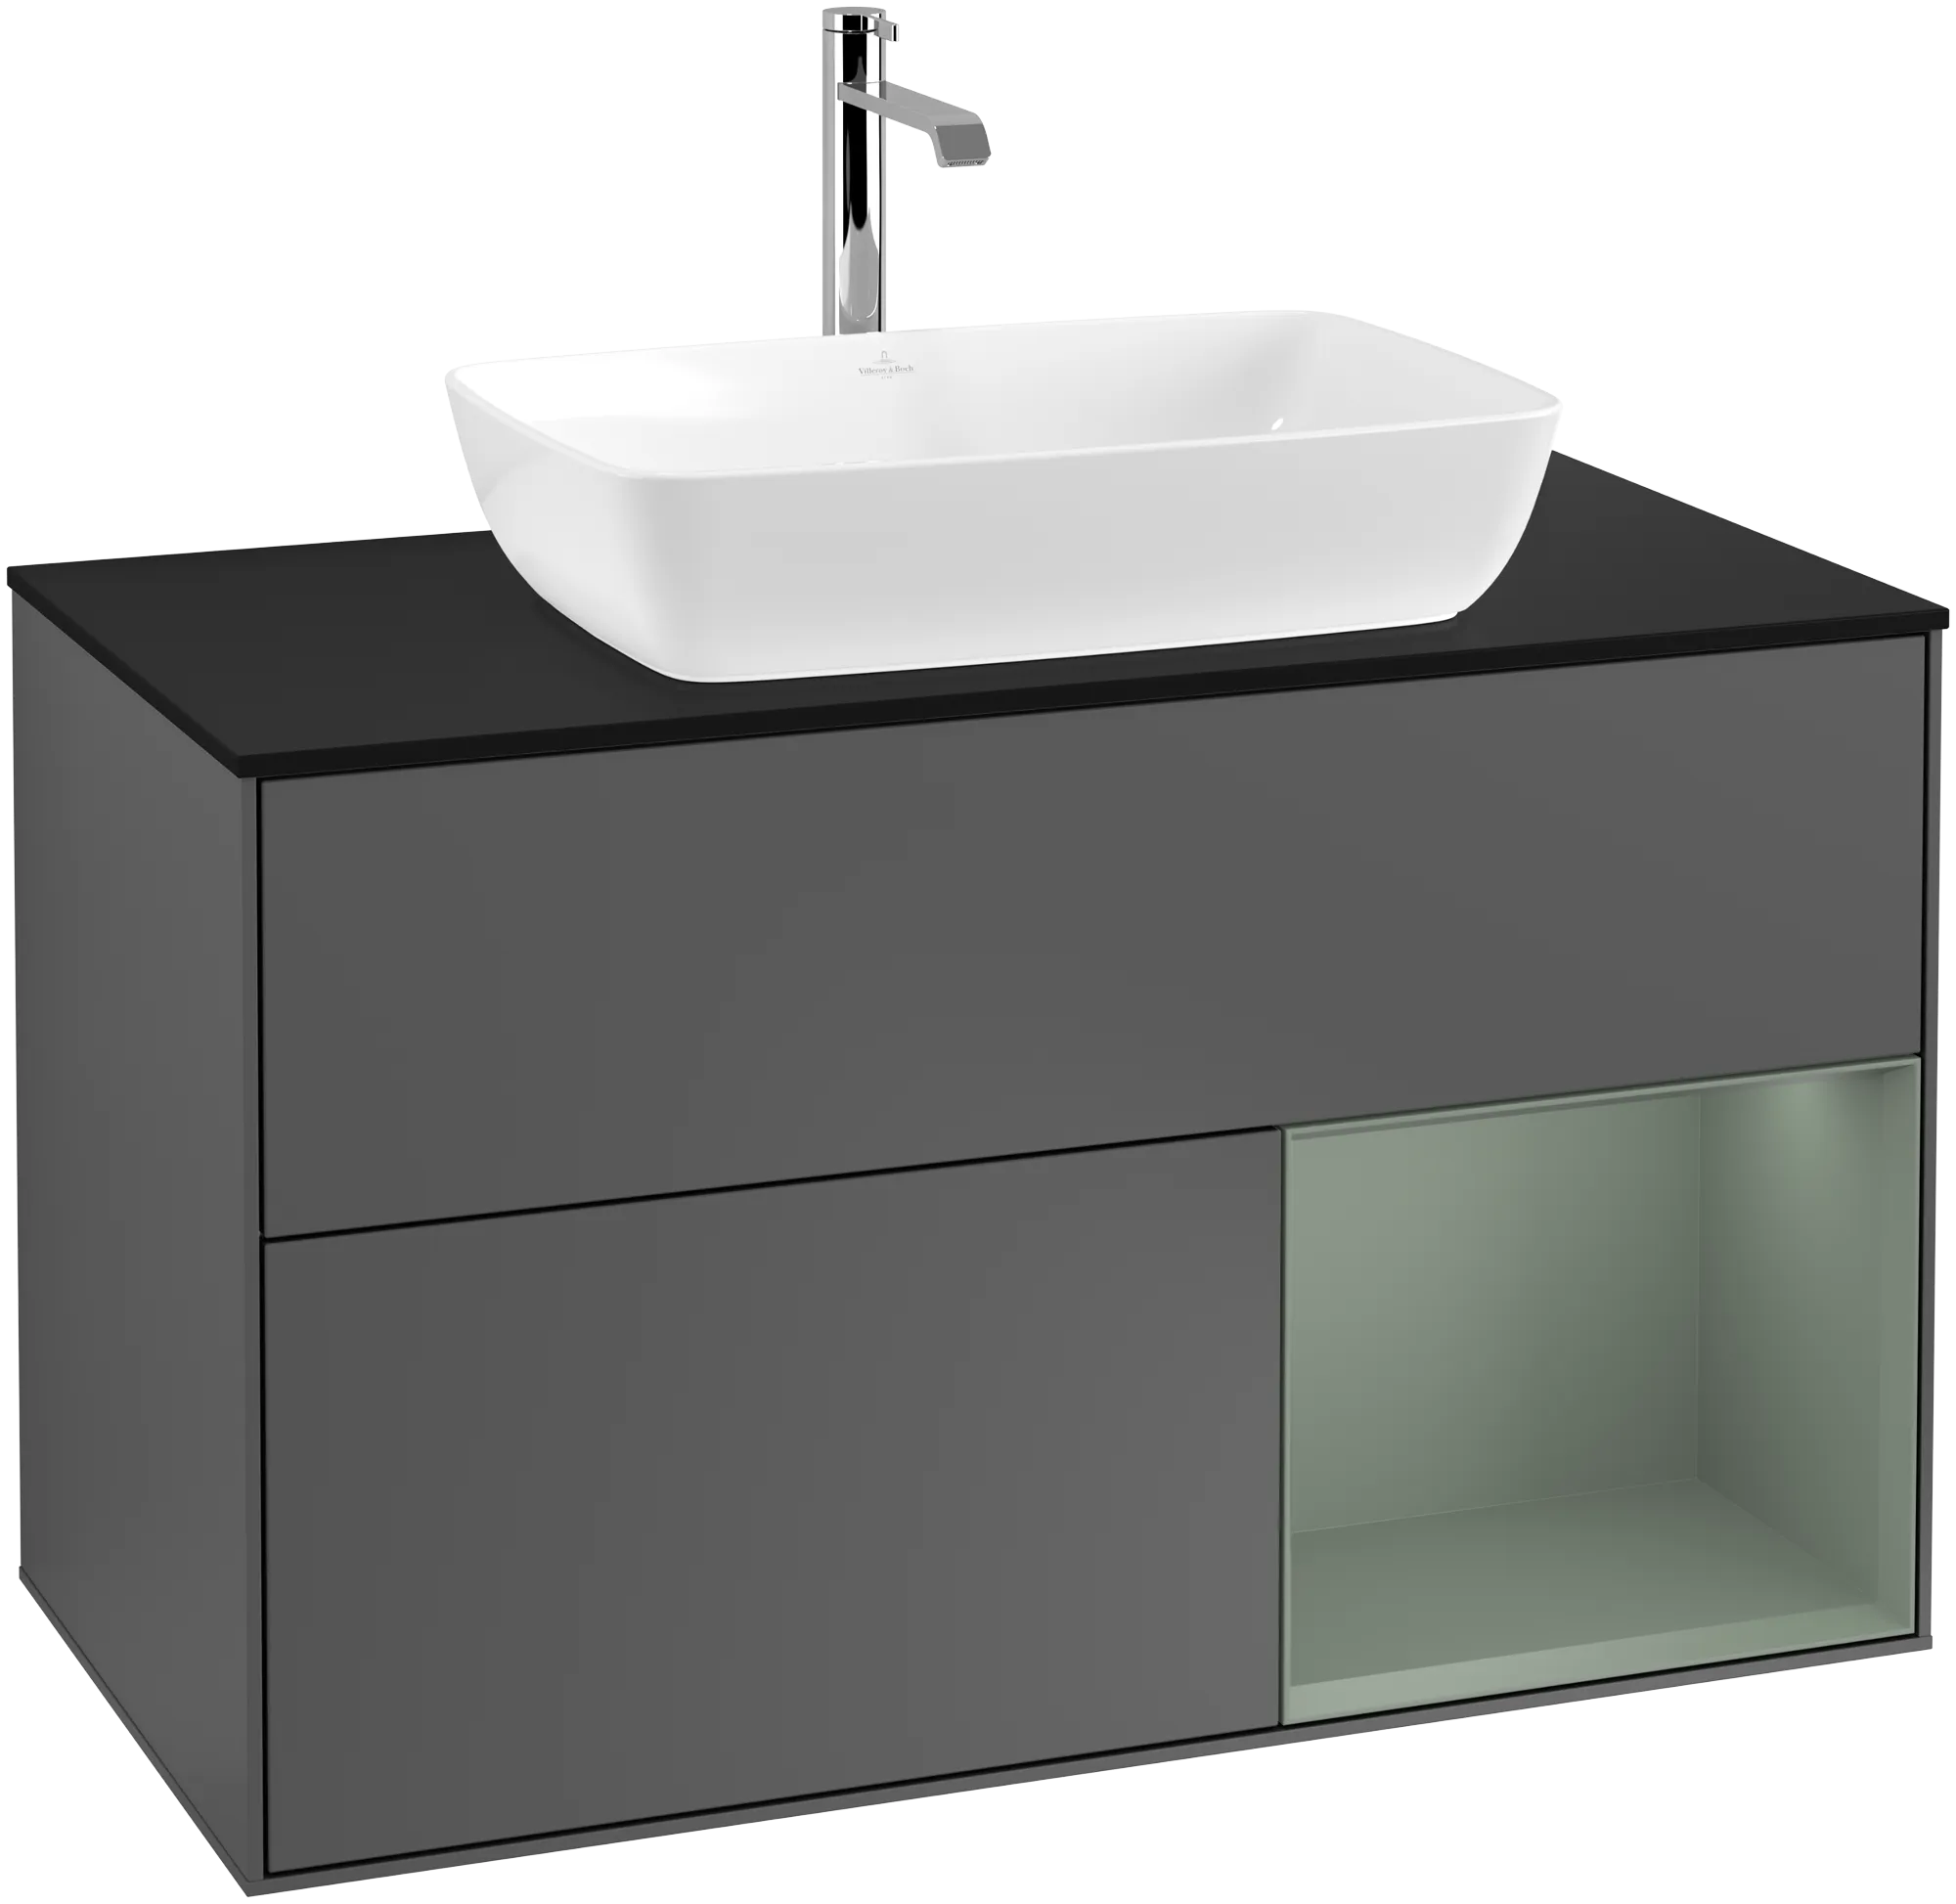 VILLEROY BOCH Finion Vanity unit, with lighting, 2 pull-out compartments, 1000 x 603 x 501 mm, Anthracite Matt Lacquer / Olive Matt Lacquer / Glass Black Matt #G782GMGK resmi